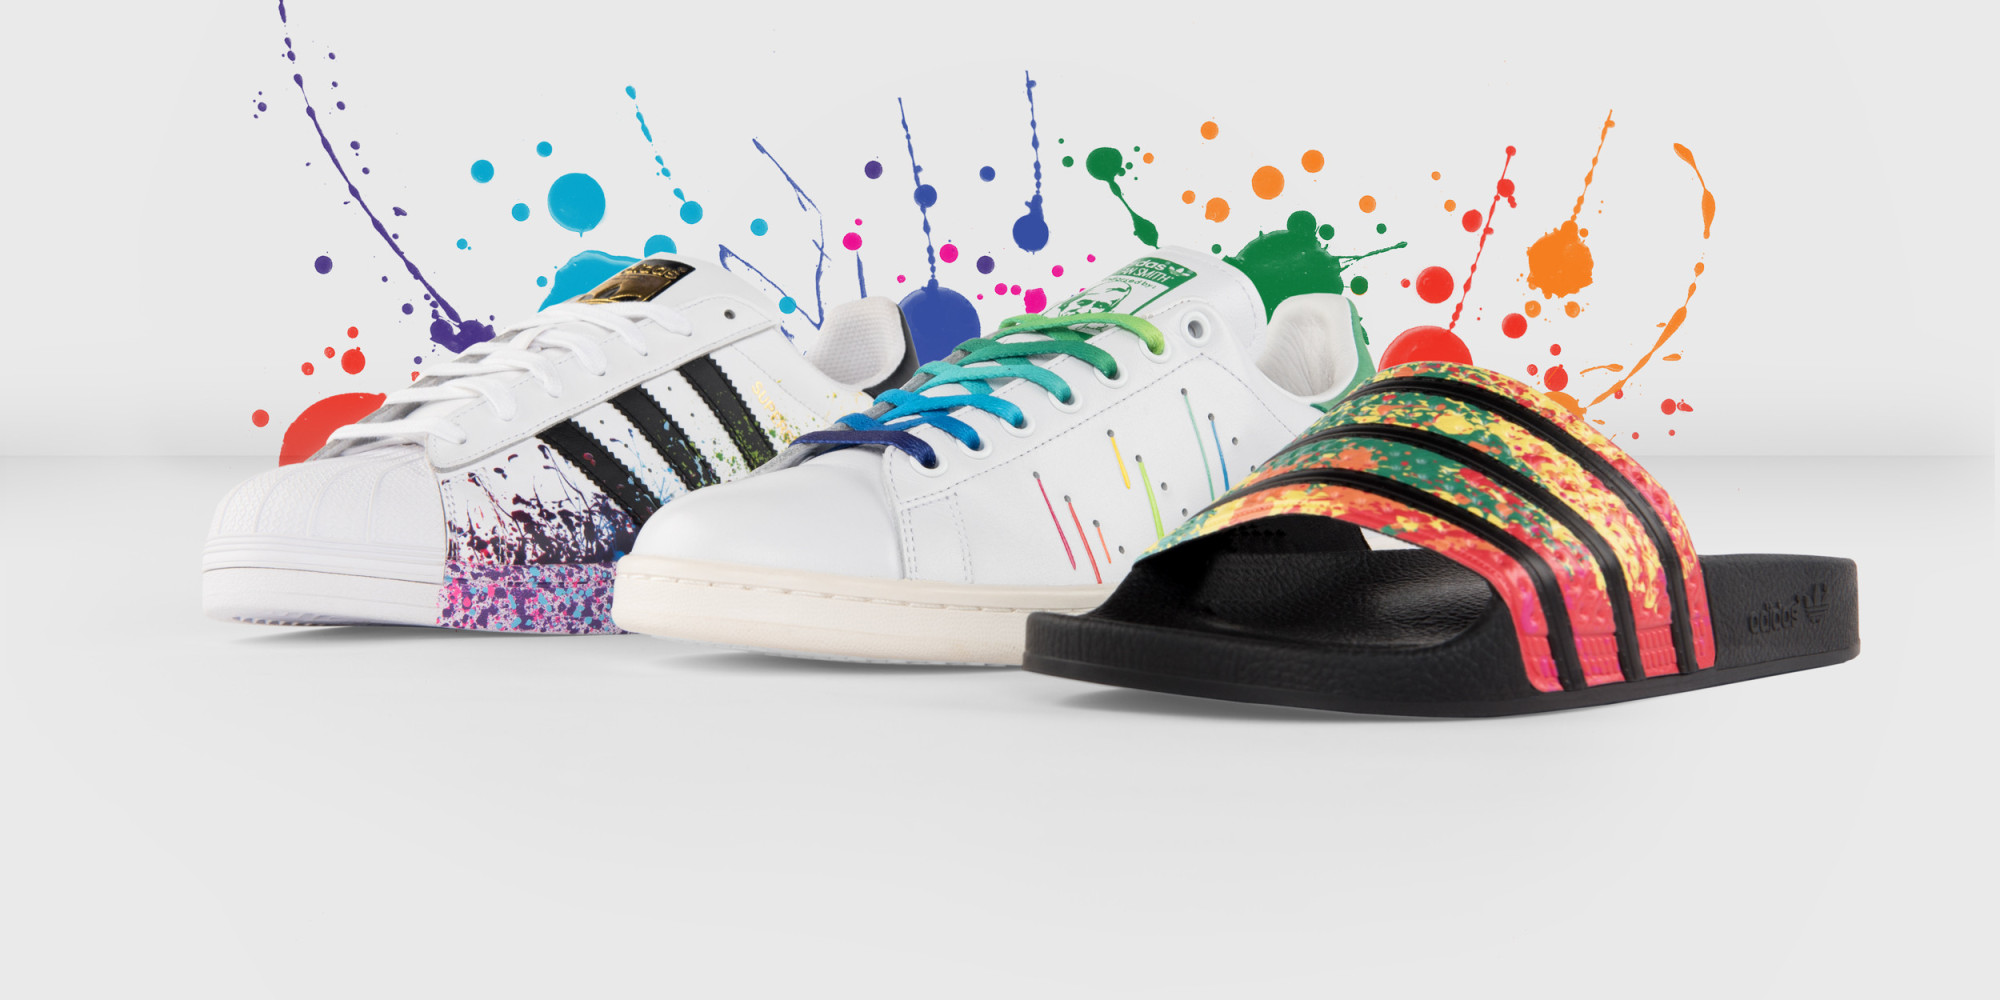 Adidas Introduces Three LGBTFriendly Designs On Its Iconic Footwear In